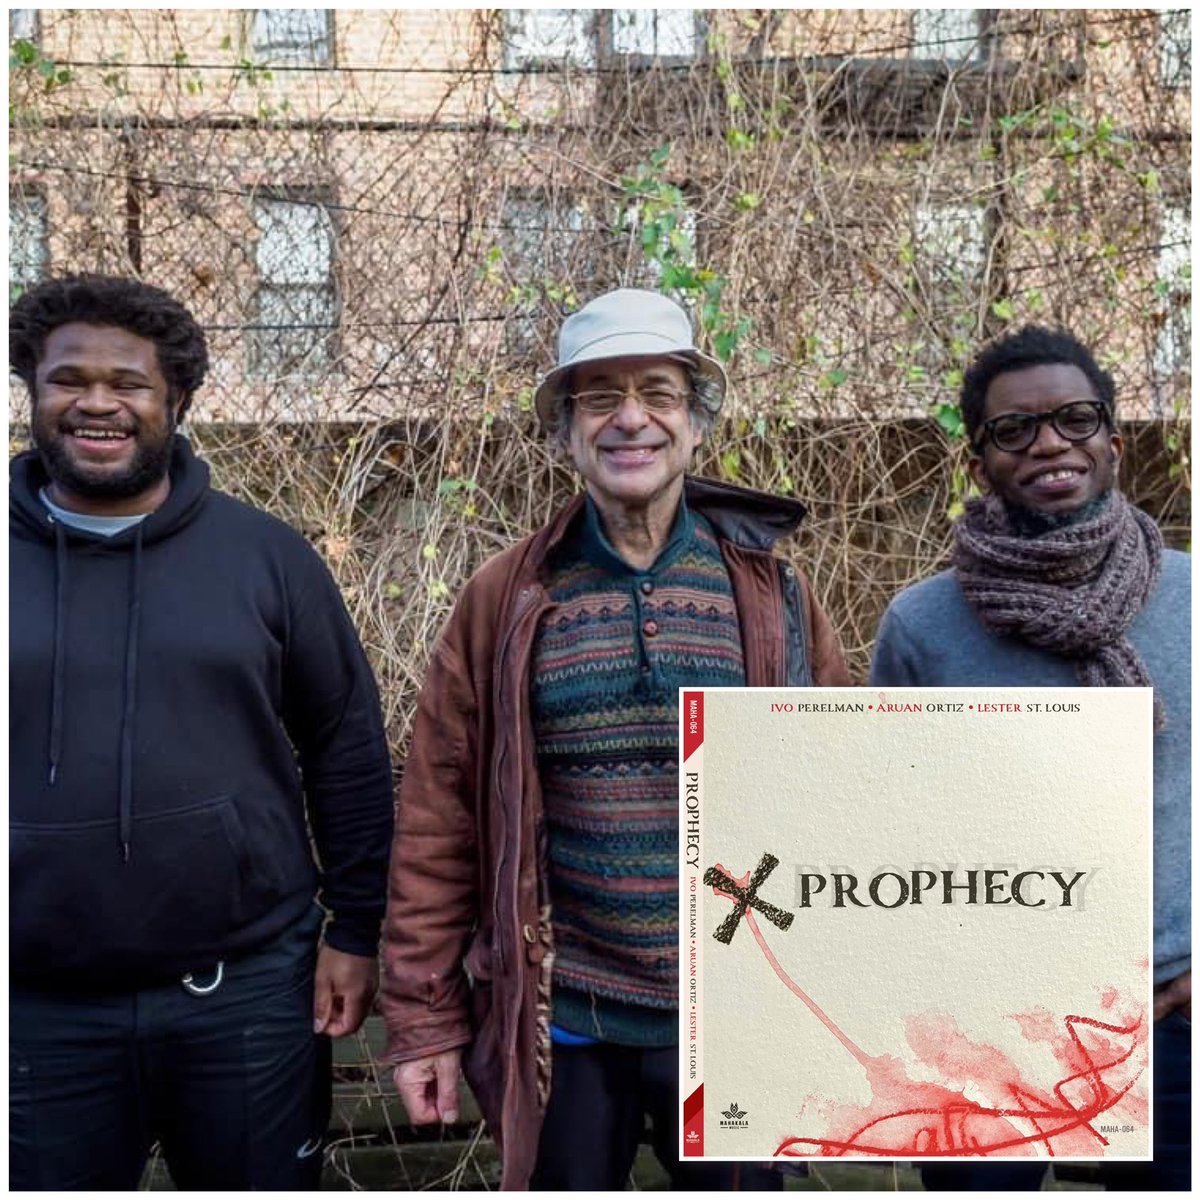 NEW June 30 release on Mahakala Music
'Prophecy'

The intellectual dense music on 'Prophecy' reaches high lyricism informed by classical, jazz and Brazilian music found in the formative years of Perelman, Ortiz and St. louis.

#aruanortiz #lesterstlouis #ivoperelman